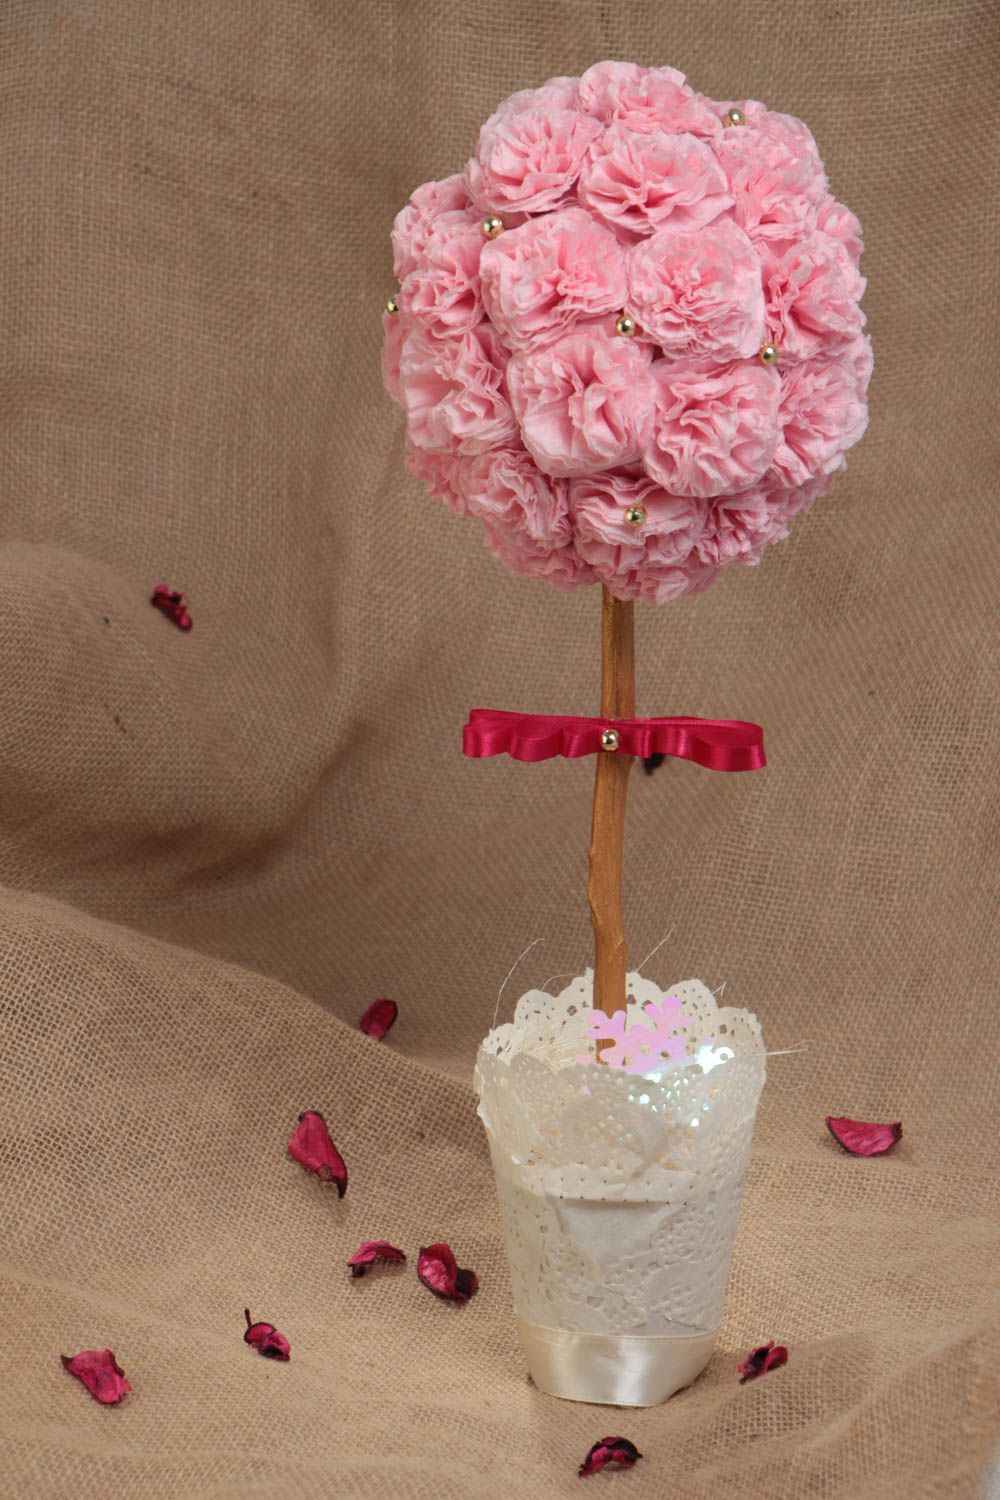 Handmade decorative tree topiary with napkins and satin ribbons in pink colors photo 1